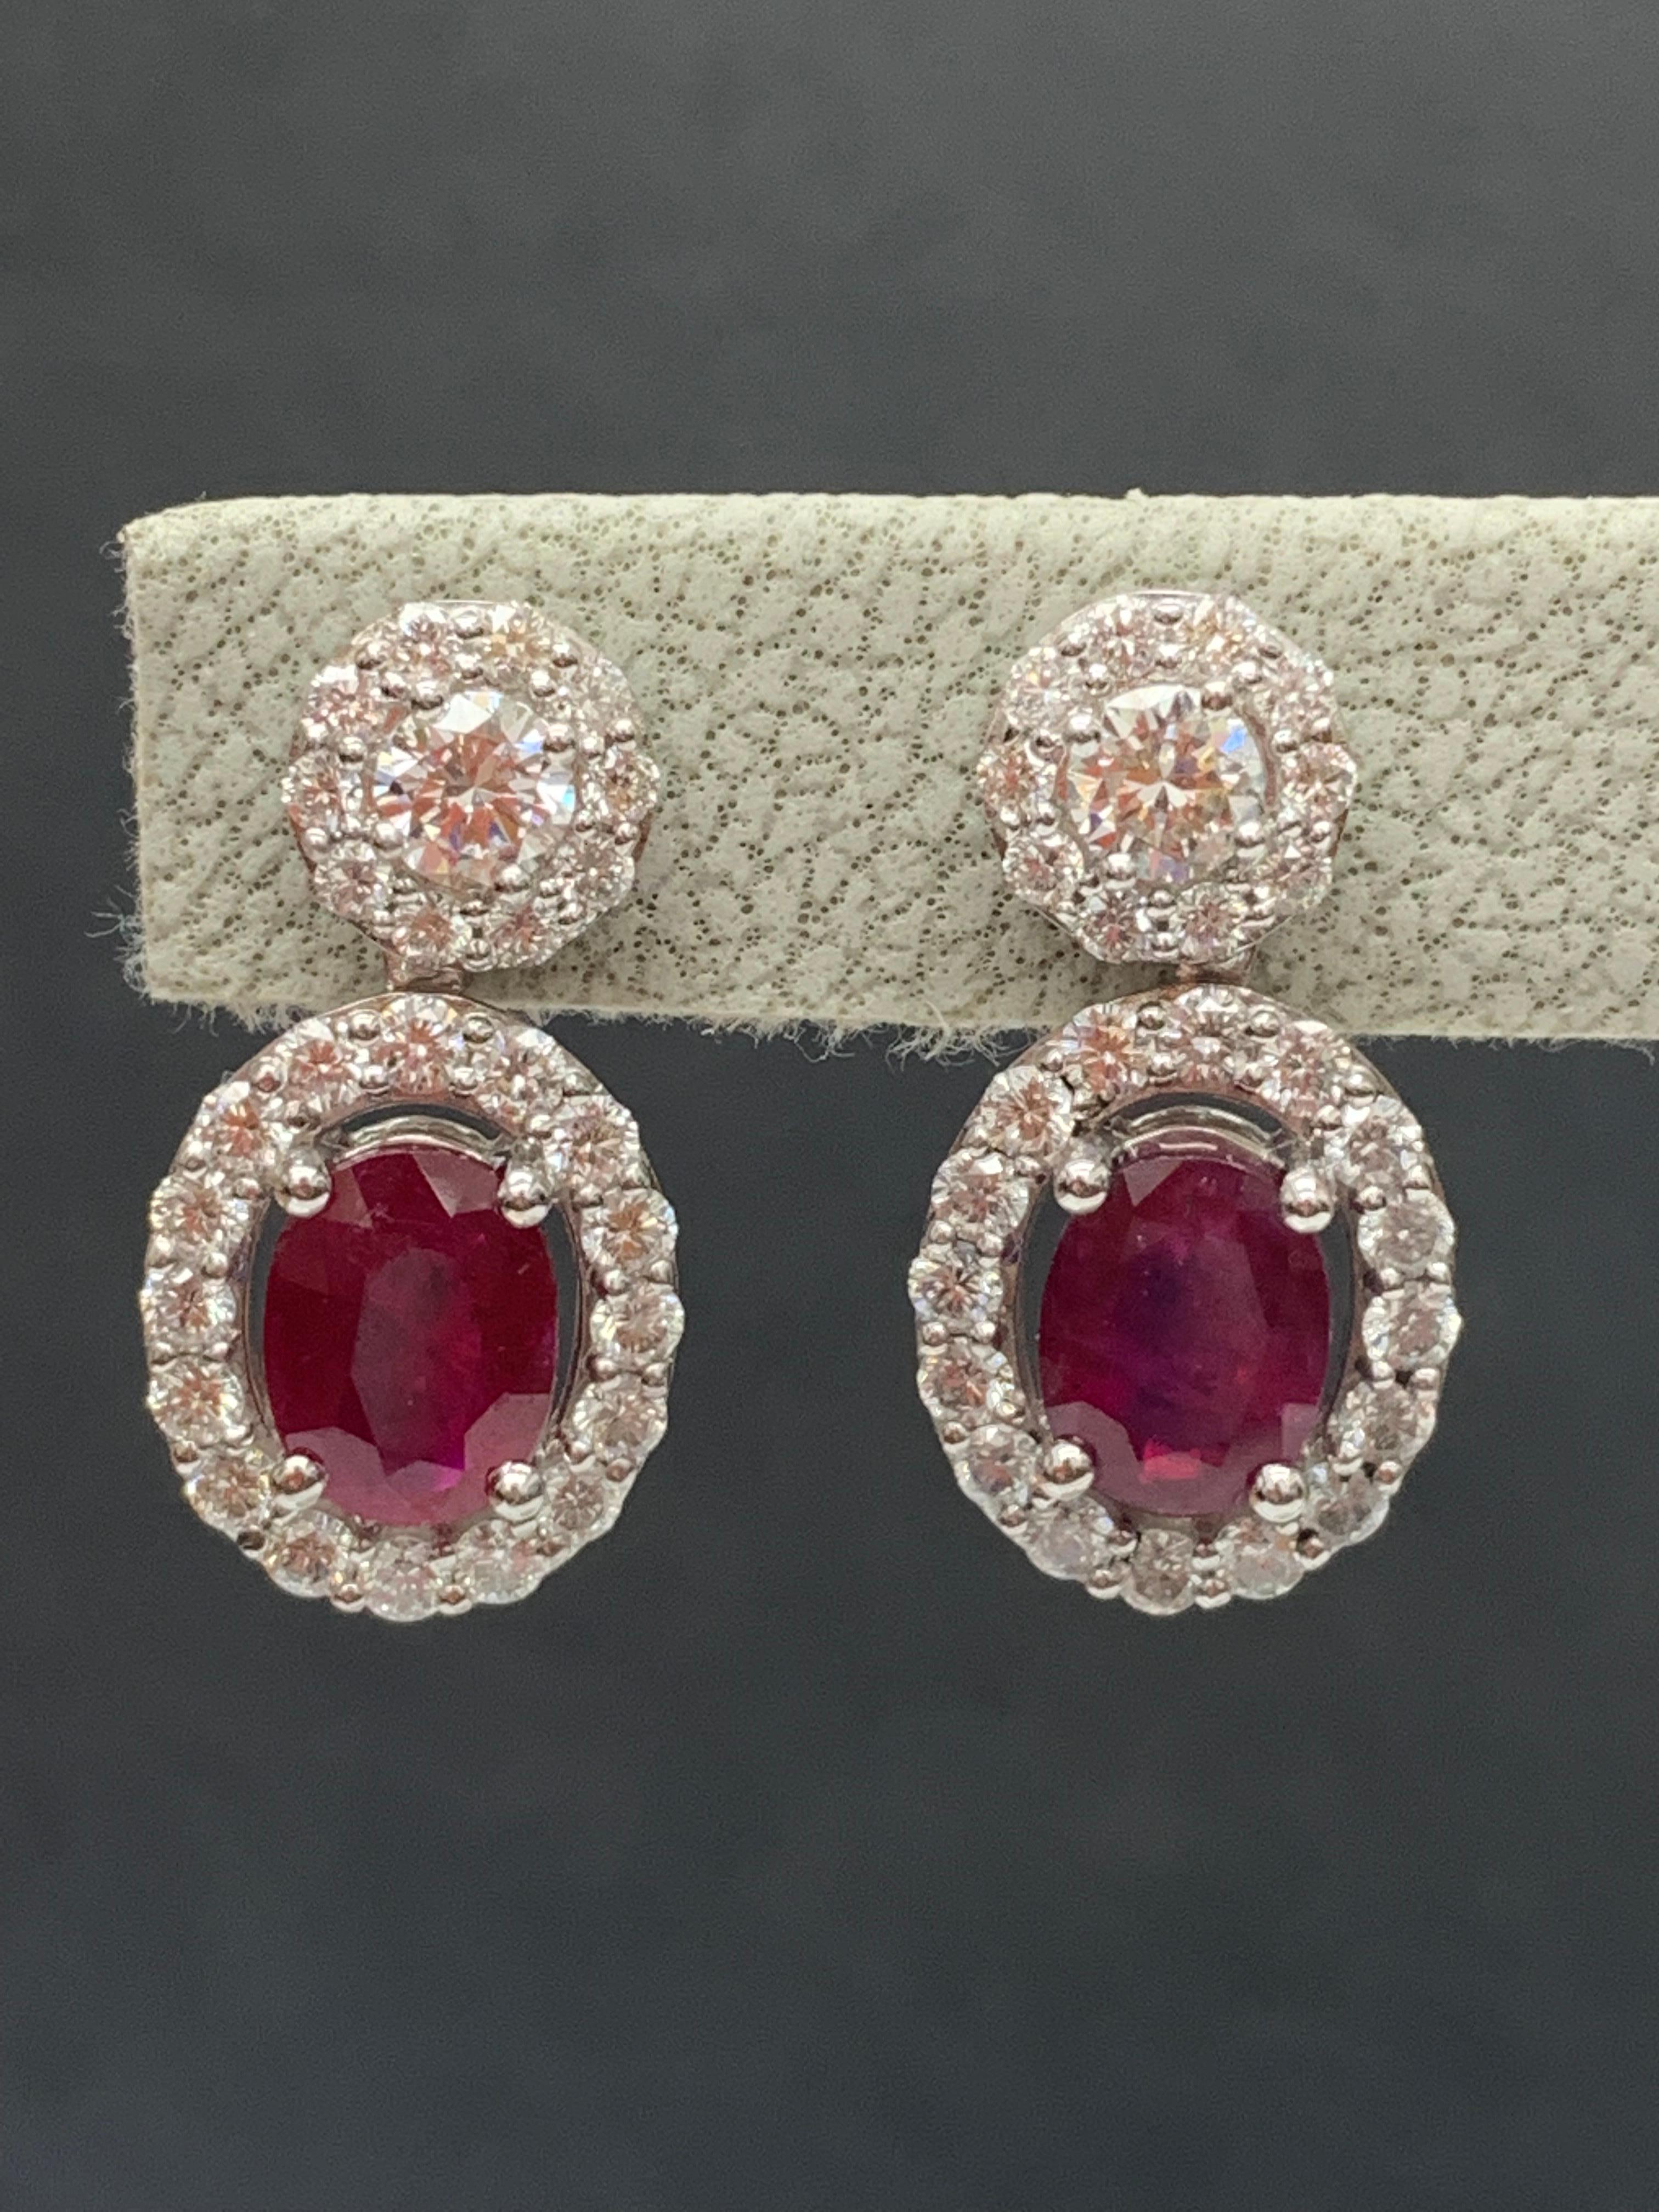 A beautiful and chic pair of drop earrings showcasing brilliant-cut diamonds, and oval-shaped Rubies set in an intricate and stylish design. 2 Diamonds on the top weigh 0.37 carats in total.  2 Rubies weigh 2.32 carats in total. Made in 18k white